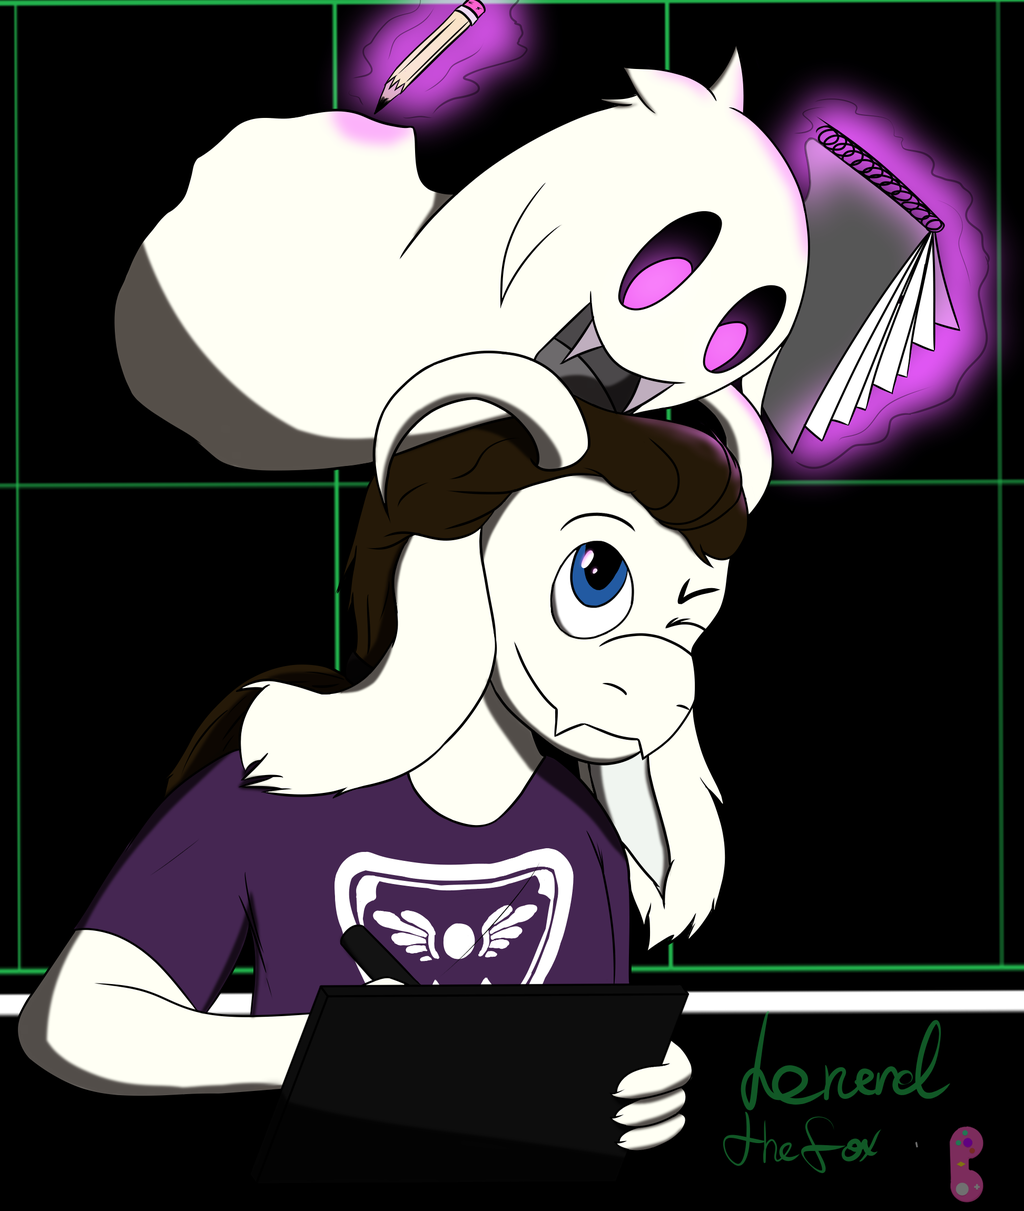 Ghosty and Goat!